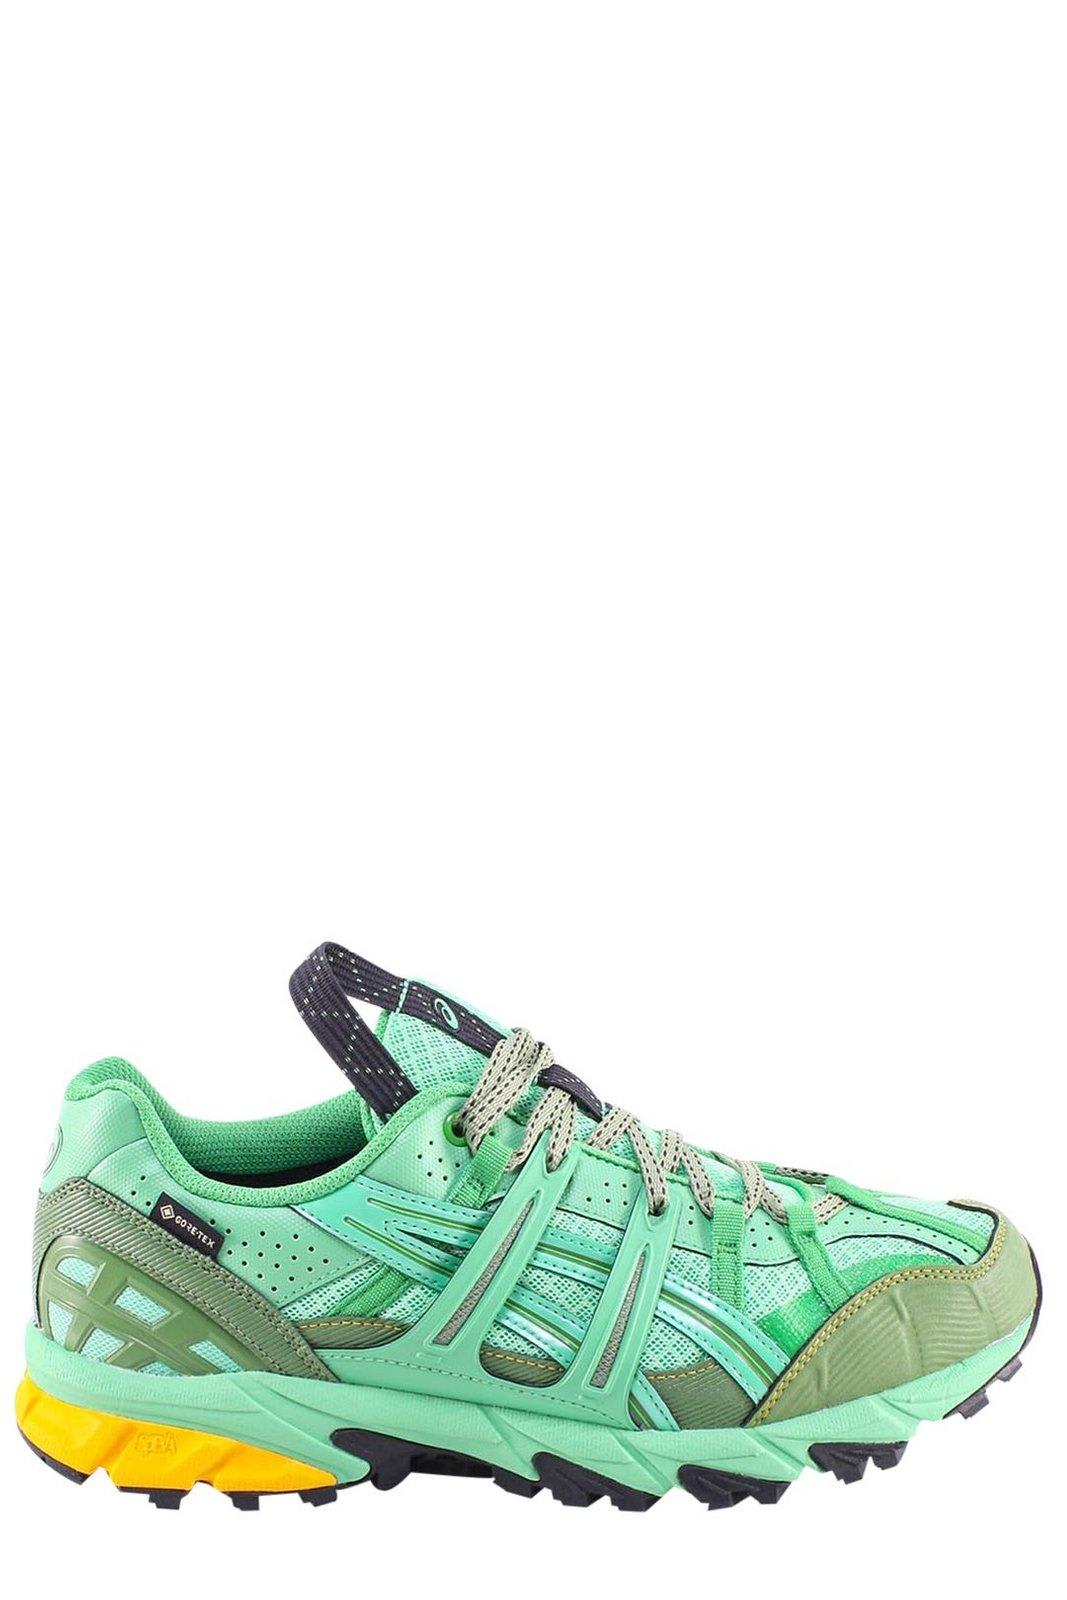 Asics Hs4-s Gel-sonoma Lace-up Trainers In Green